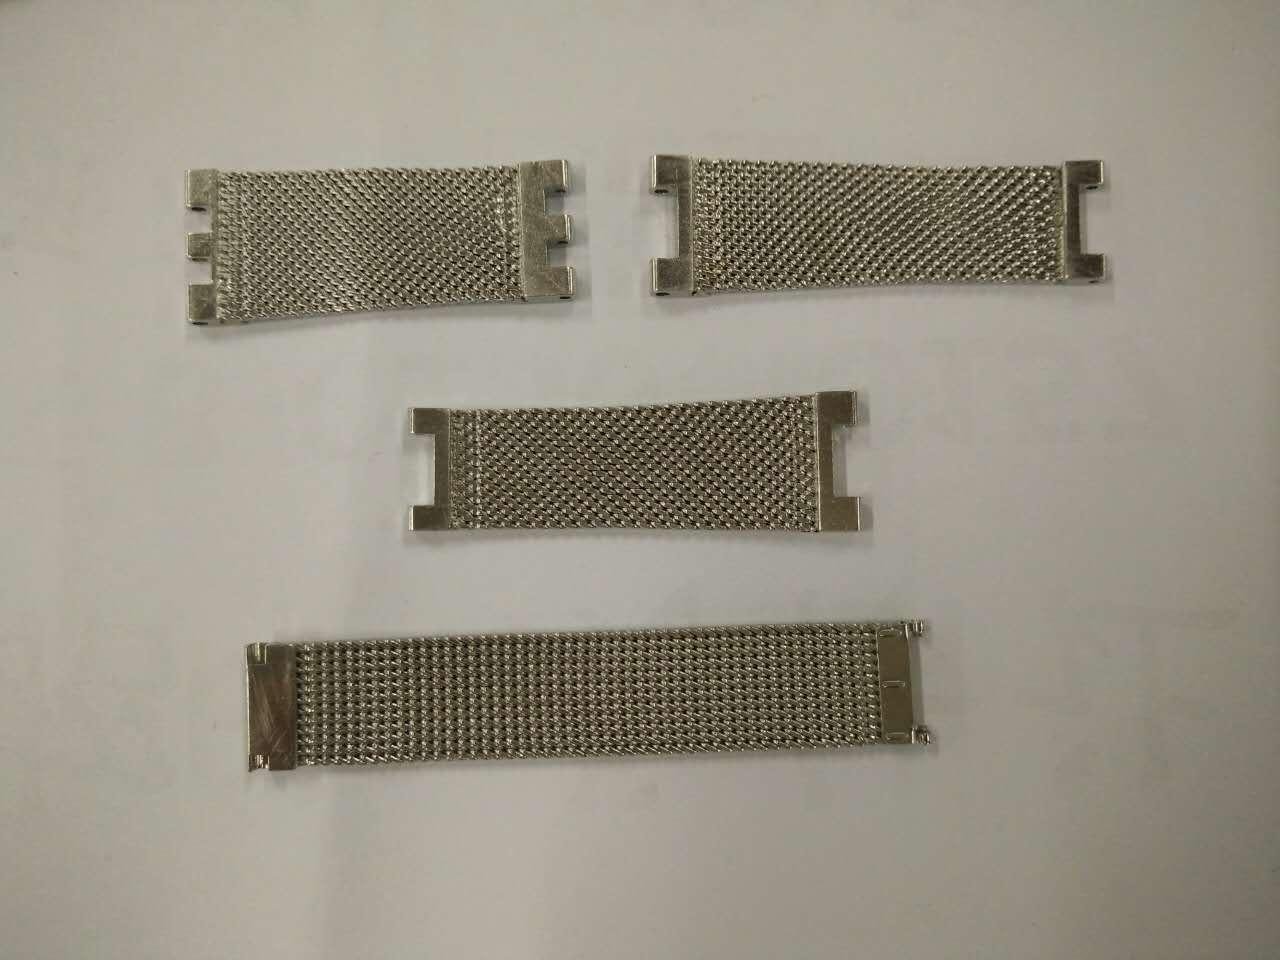 Production of reticulated Strap Bracelet Stainless steel strap 3